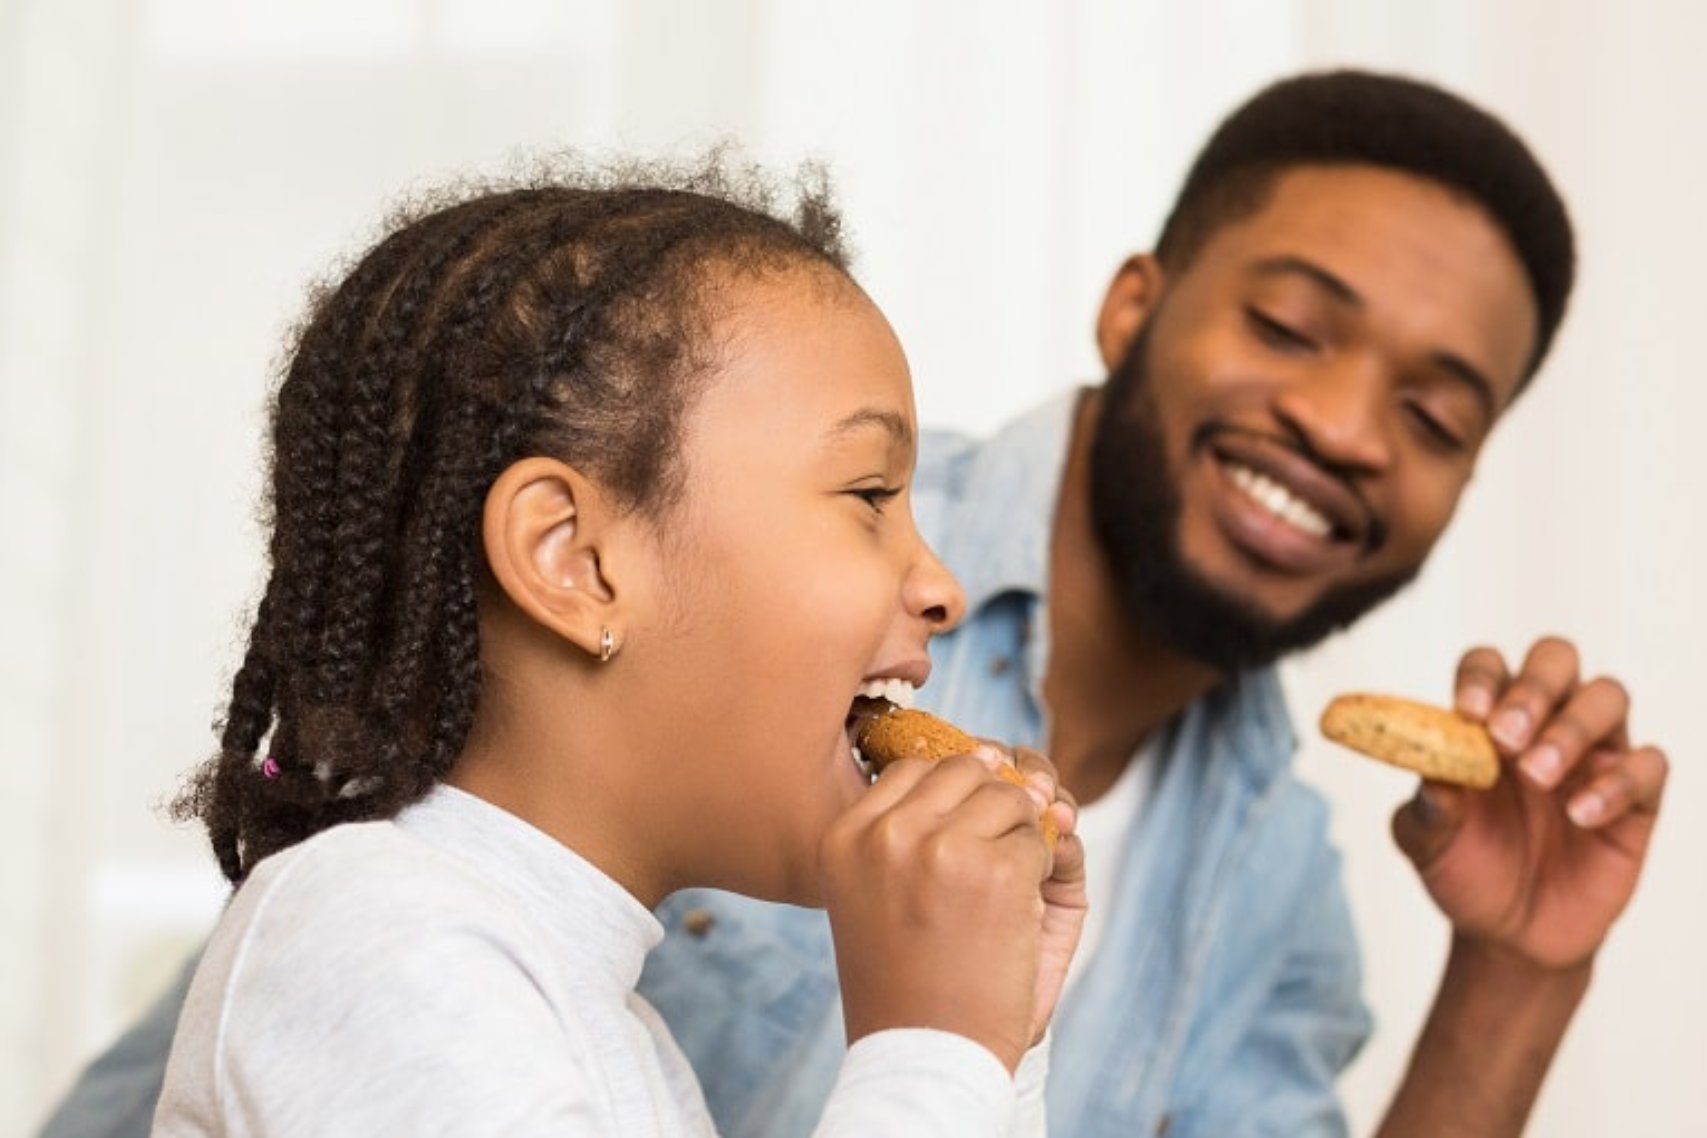 A man and a kid eating cookies